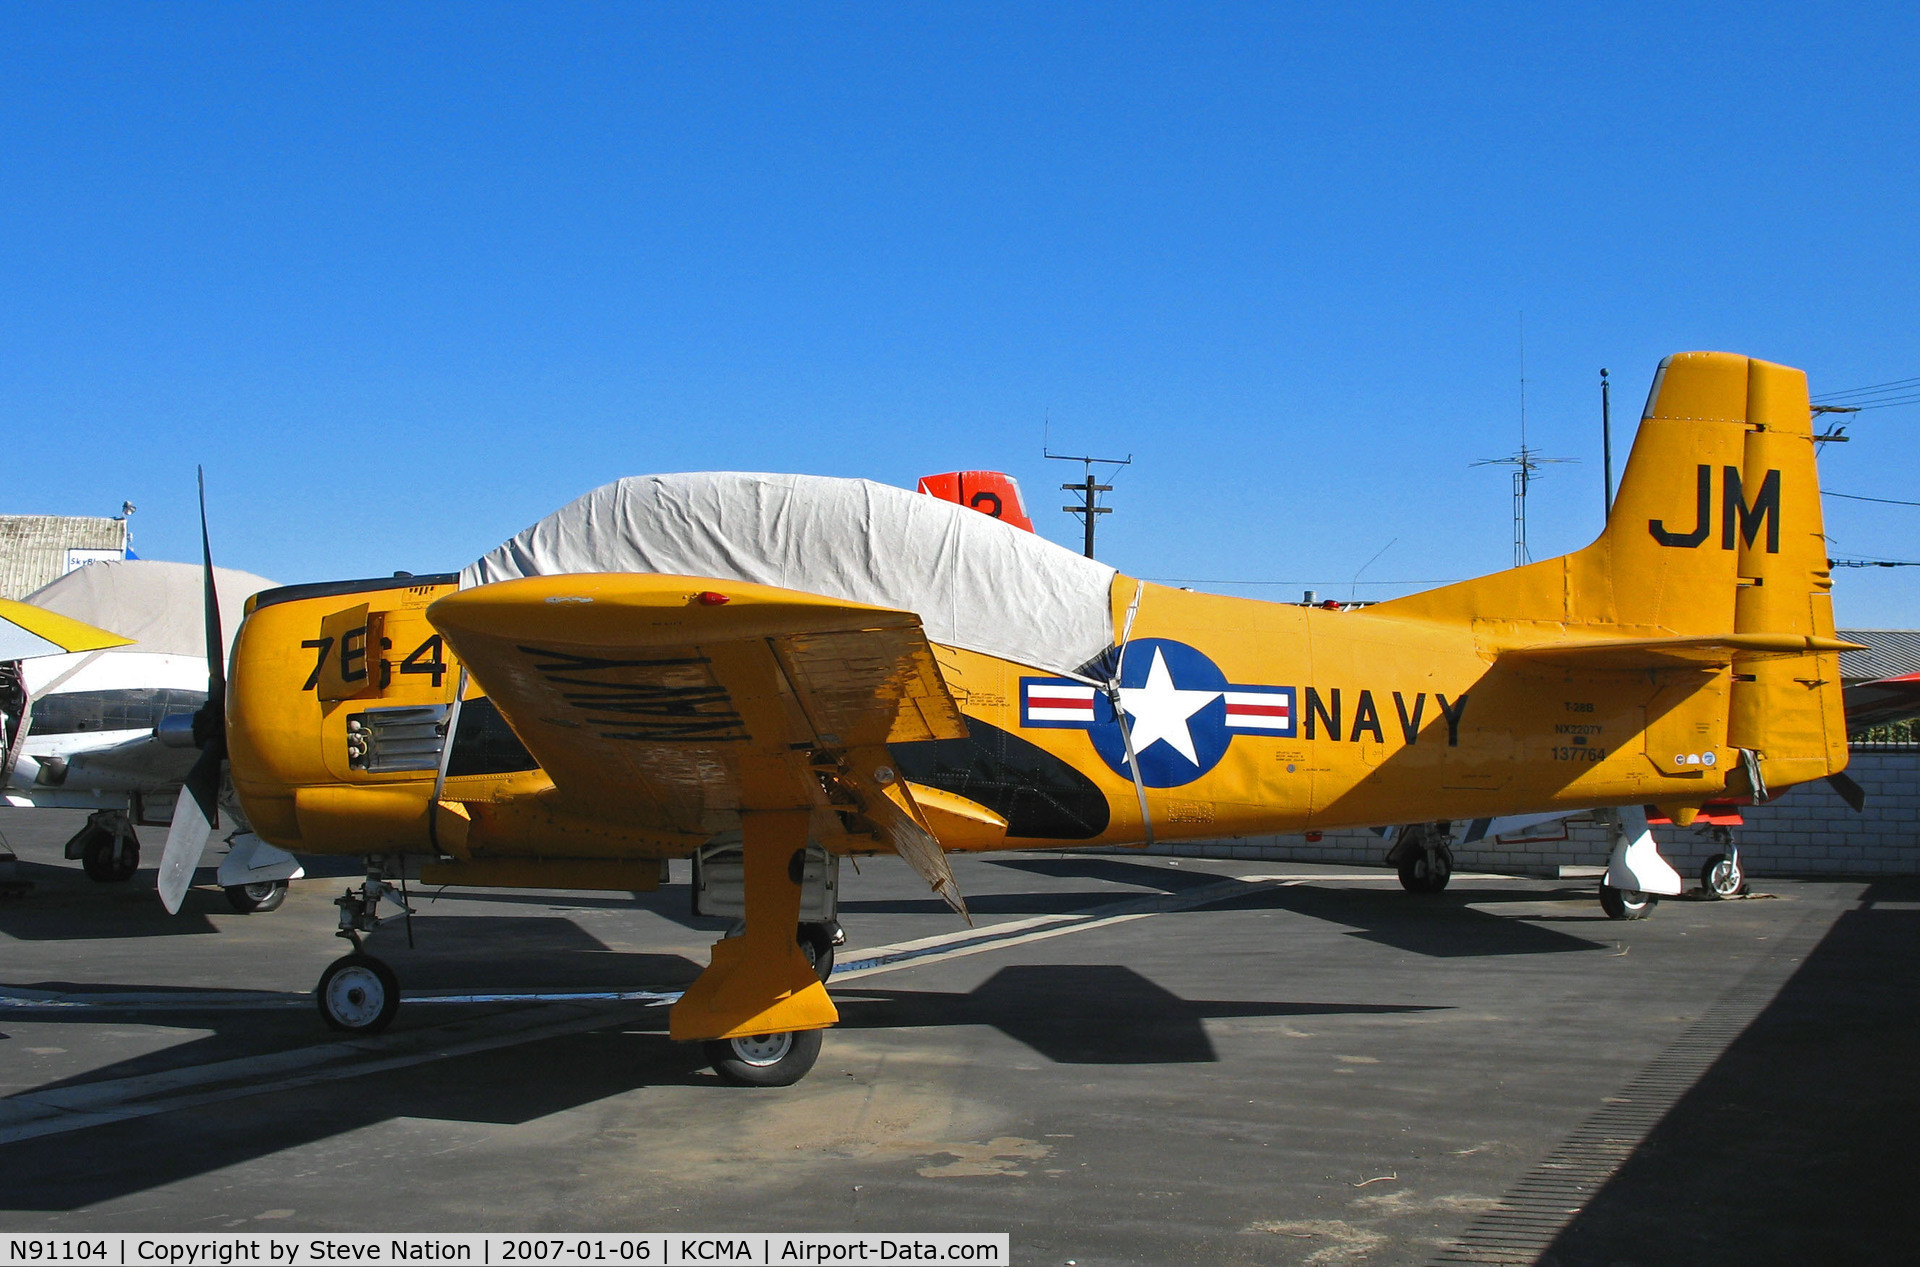 N91104, 1946 North American Navion C/N NAV-4-6, North American T-28B in NAVY yellow cs as JM/764 BuAer 137764 (painted as NX2207Y) at Camarillo Airport (CA) on sunny, balmy January day